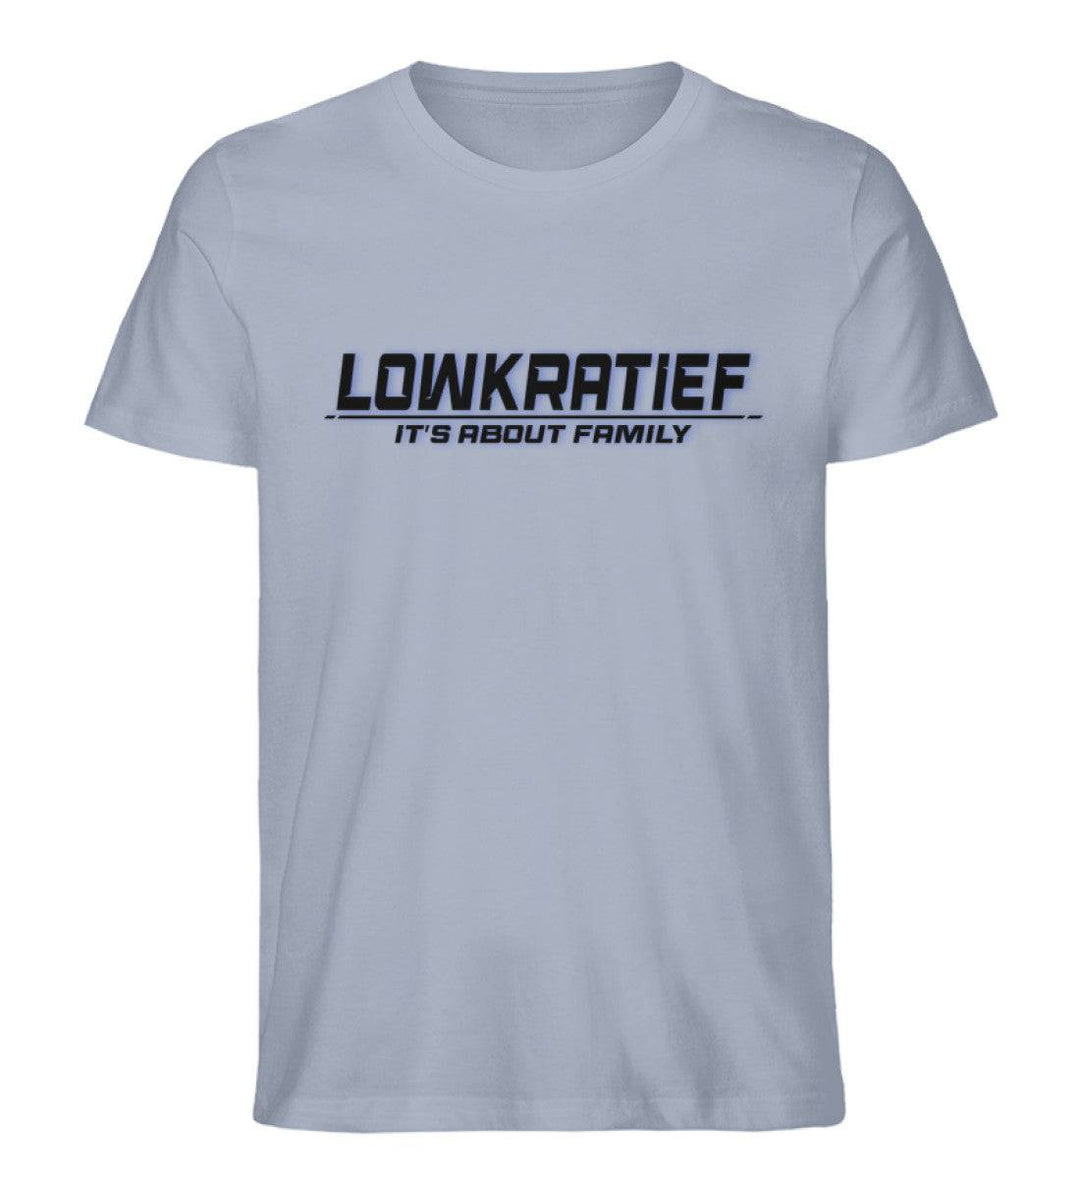 Family Shirt - LOWKRATIEF CLOTHING